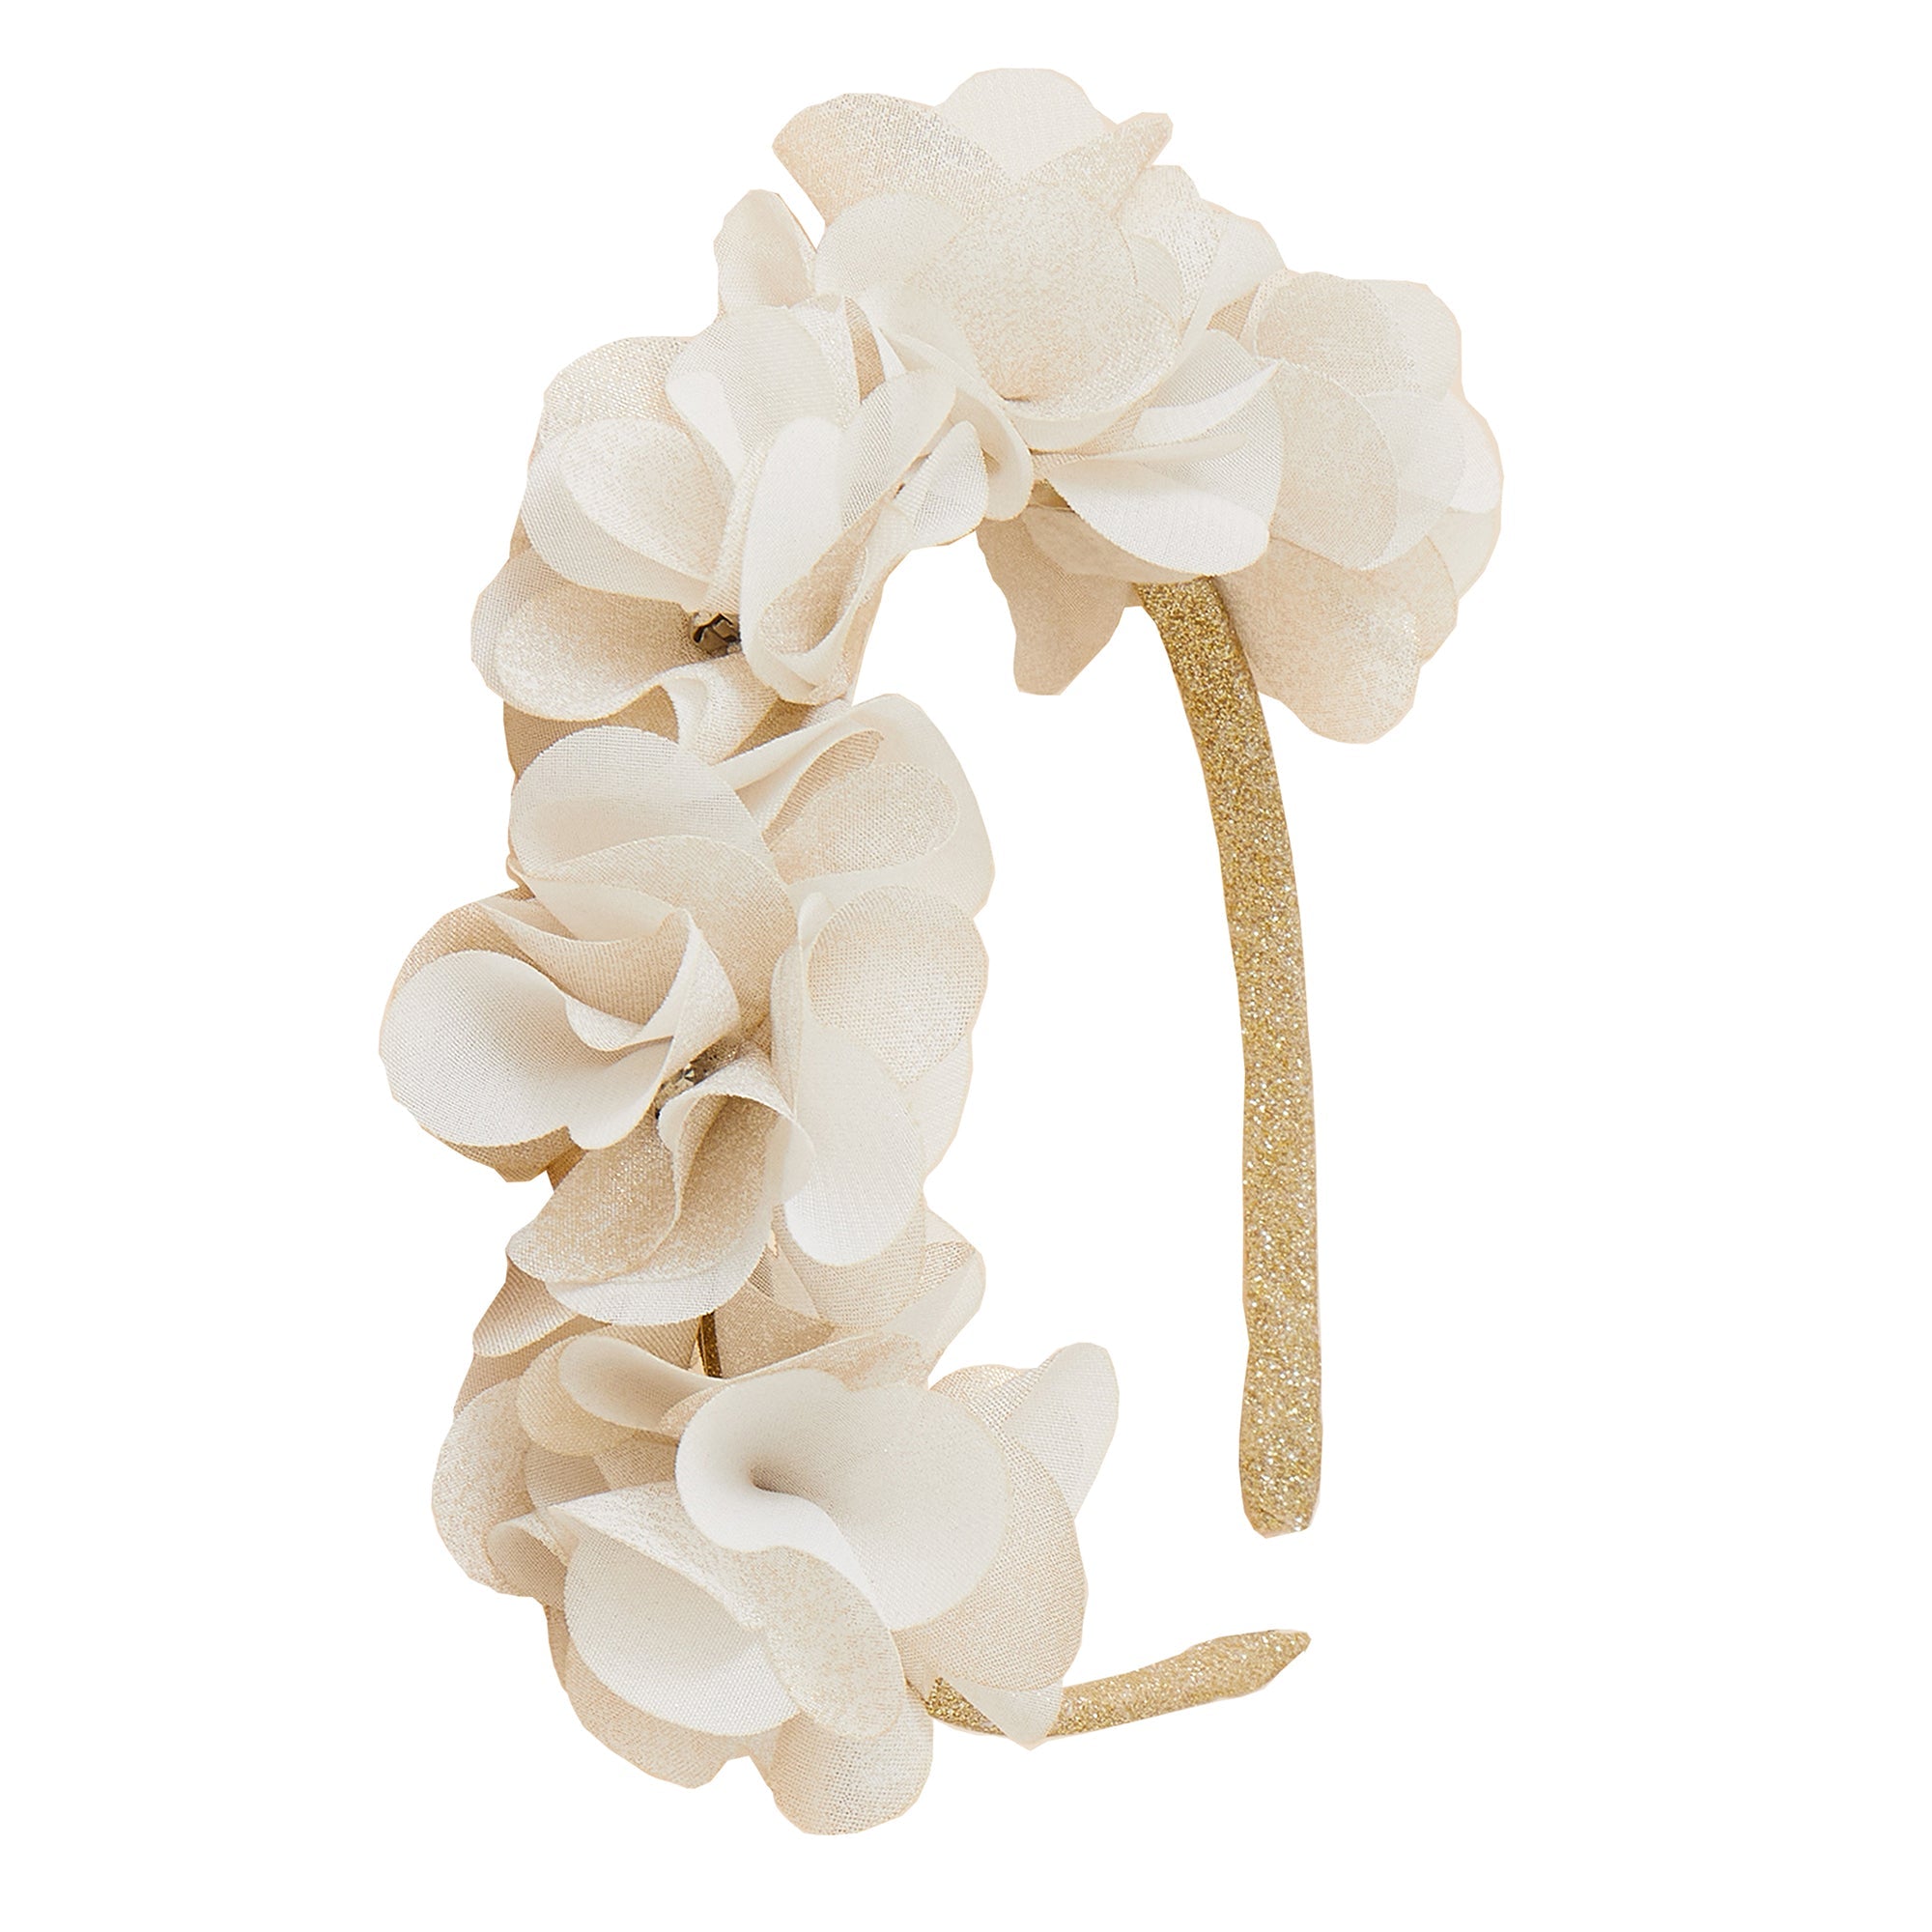 Accessorize London Girl's R Flower Crown Alice Band